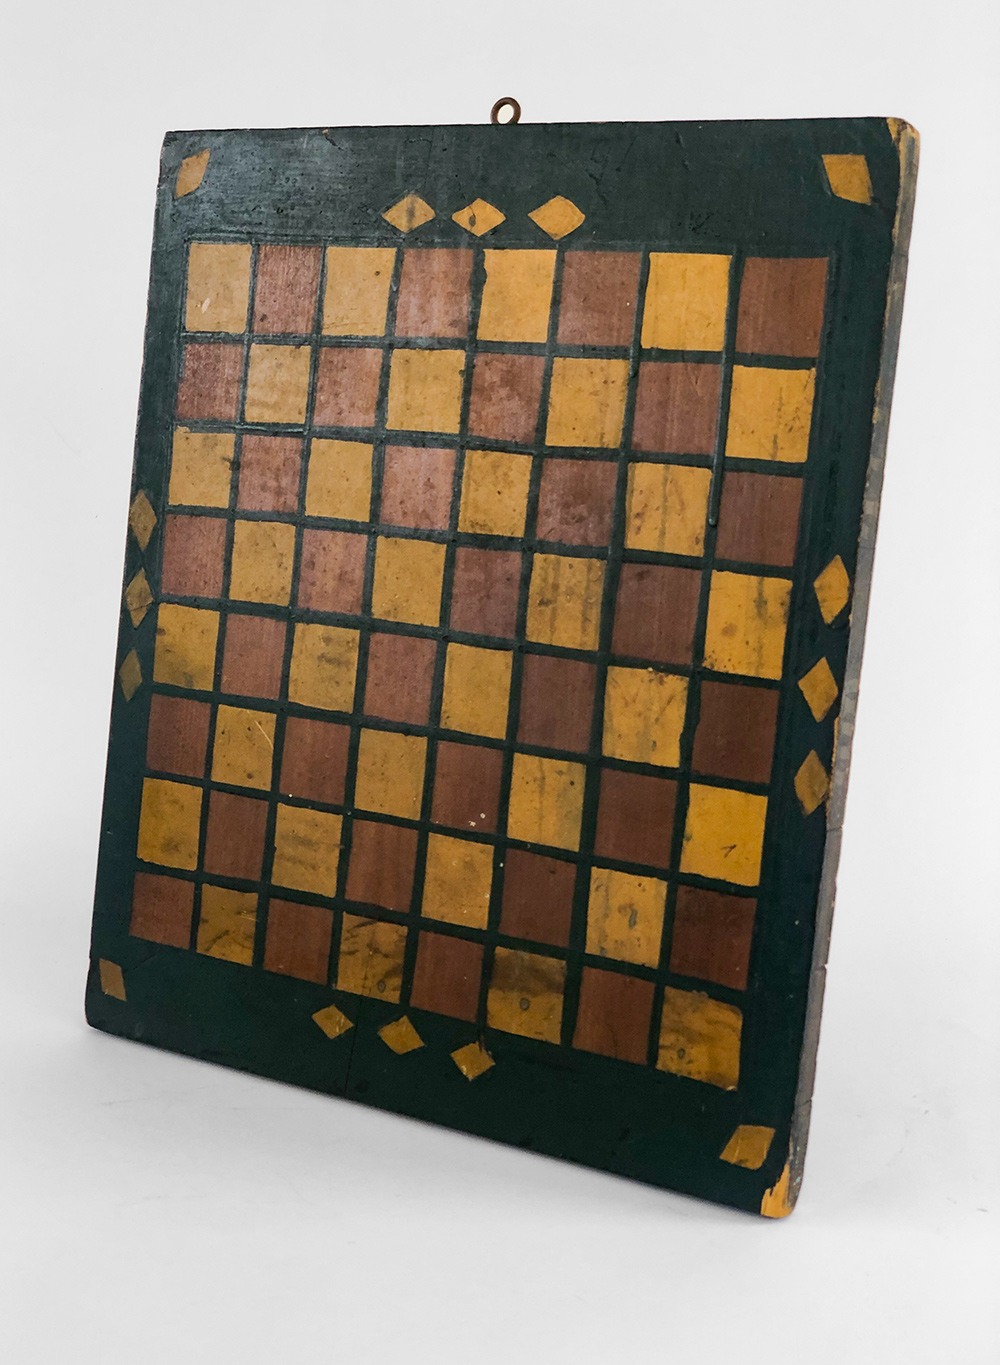 two color painted checkers gambeoard with gold diamond on green ground 